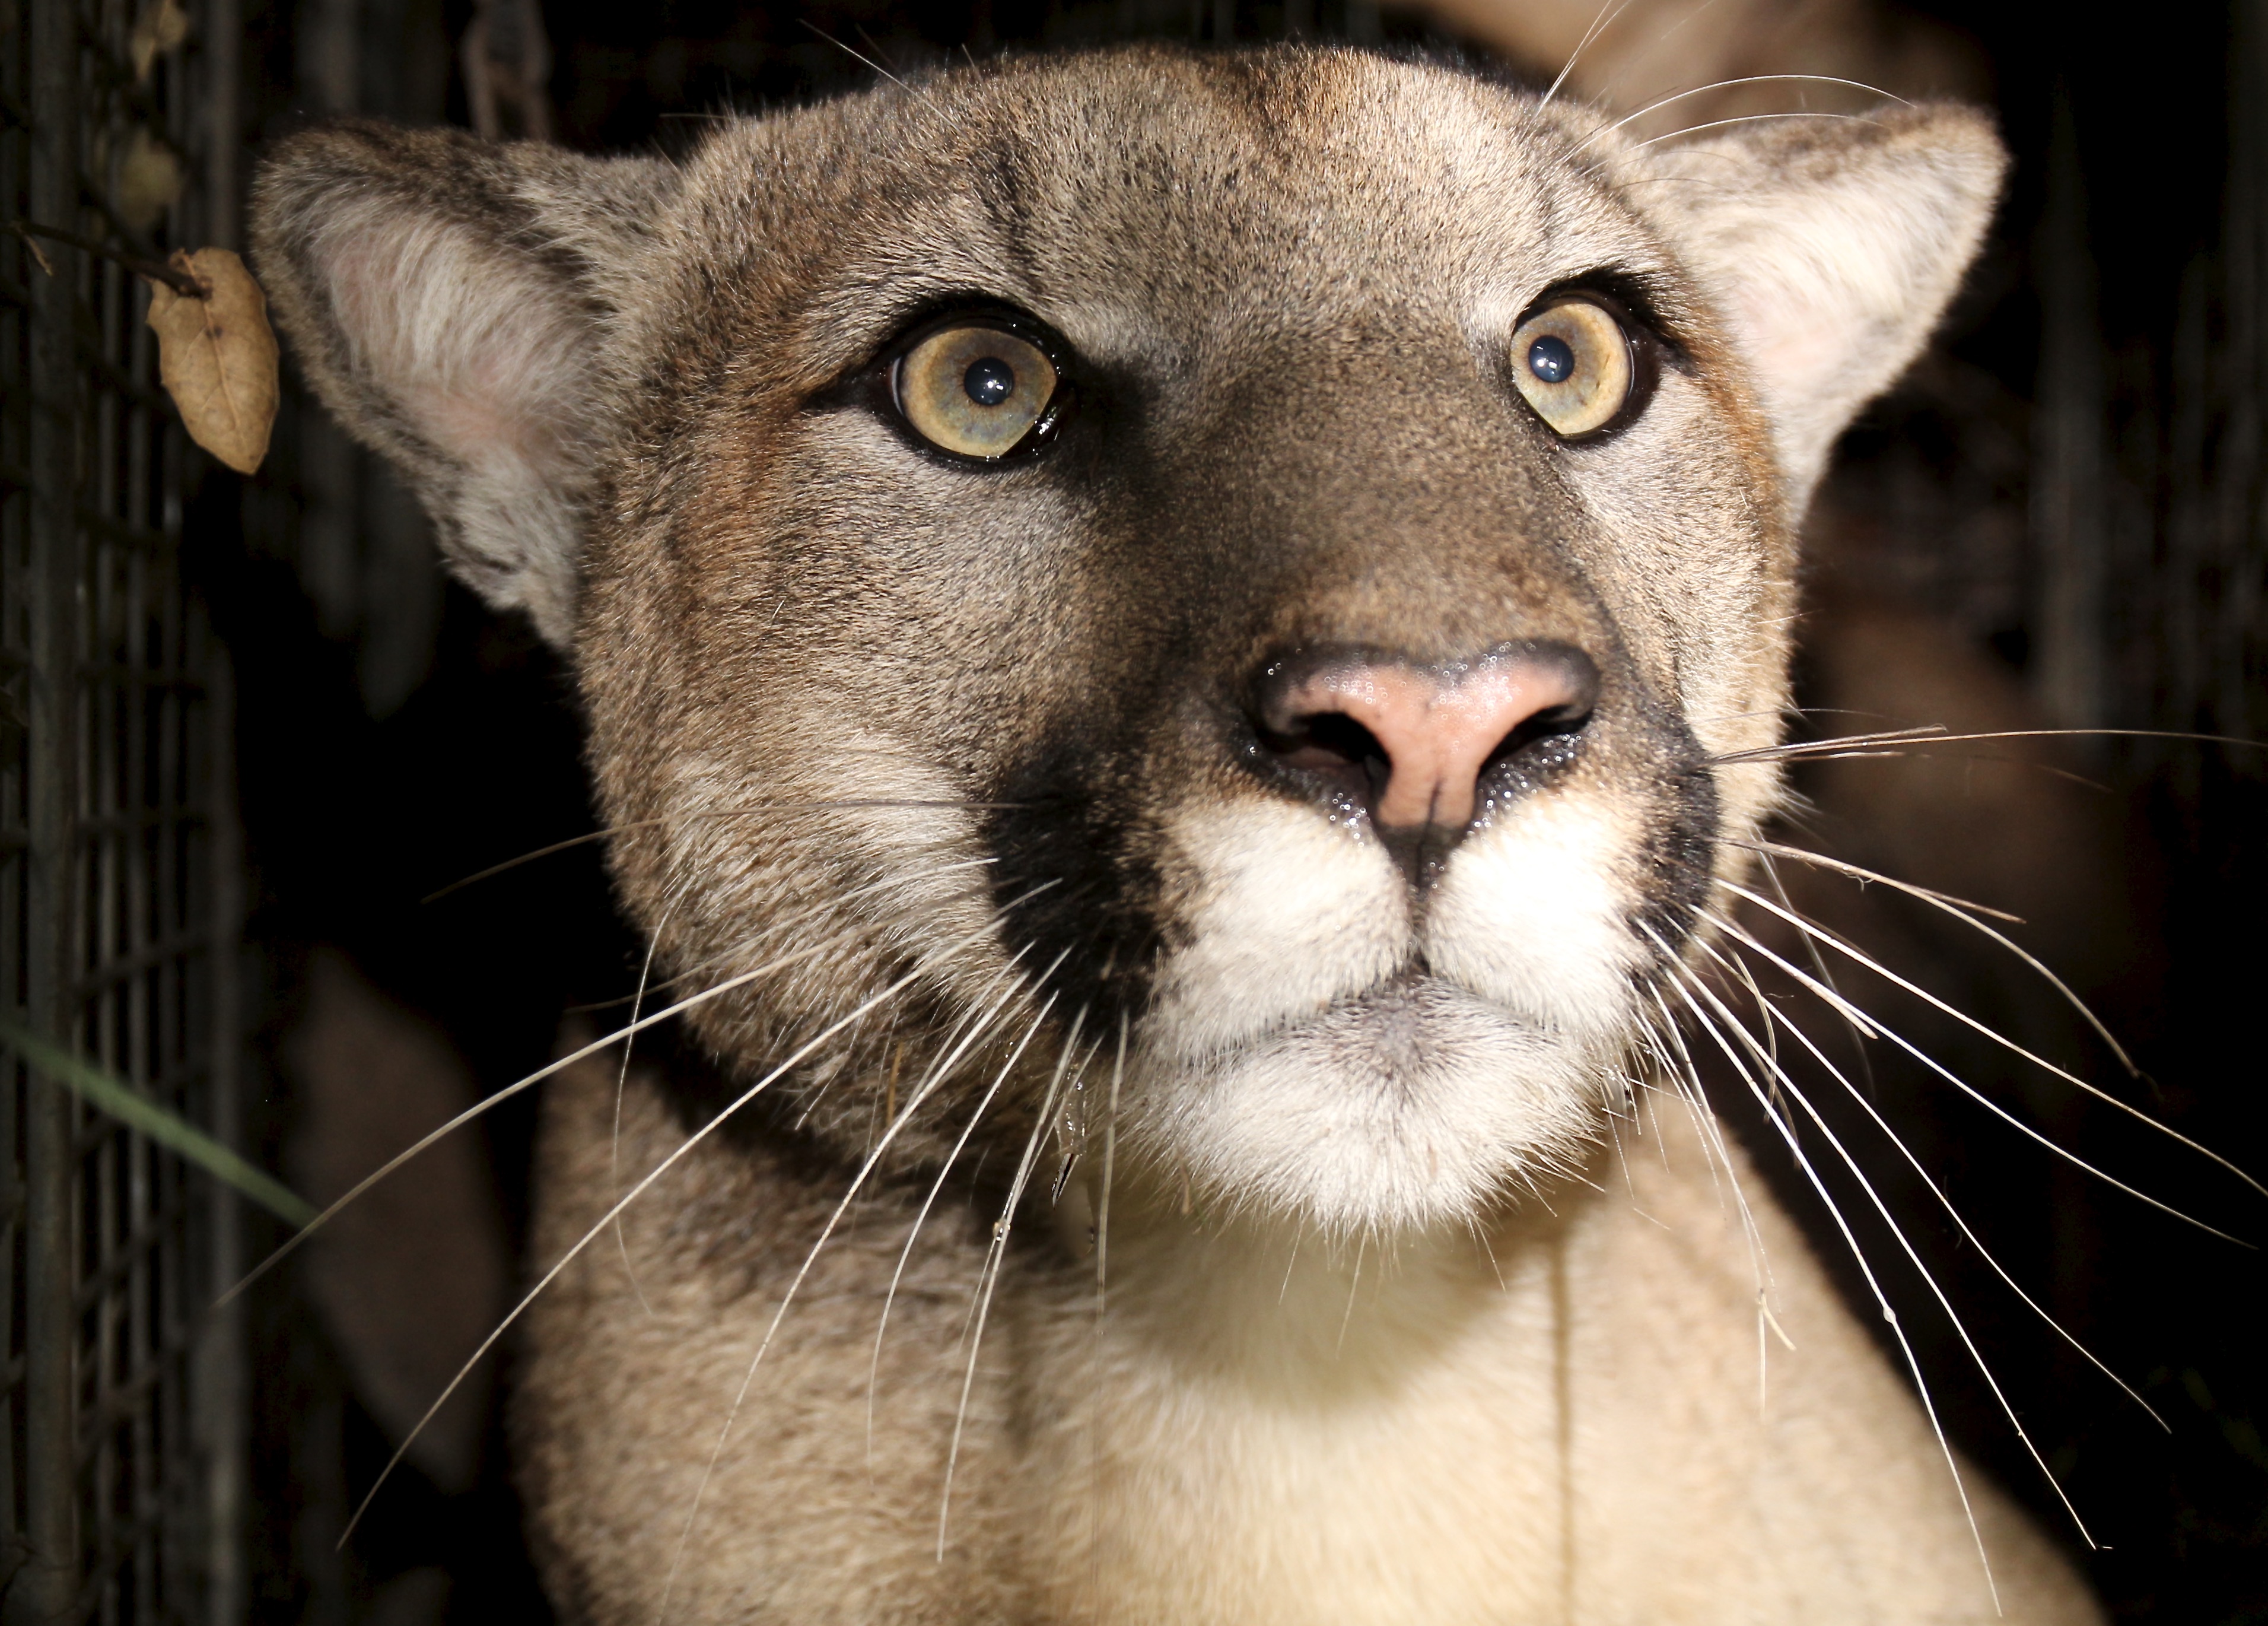 P81, first collared mountain lion to have reproductive and tail defects in Santa Monica Mountains